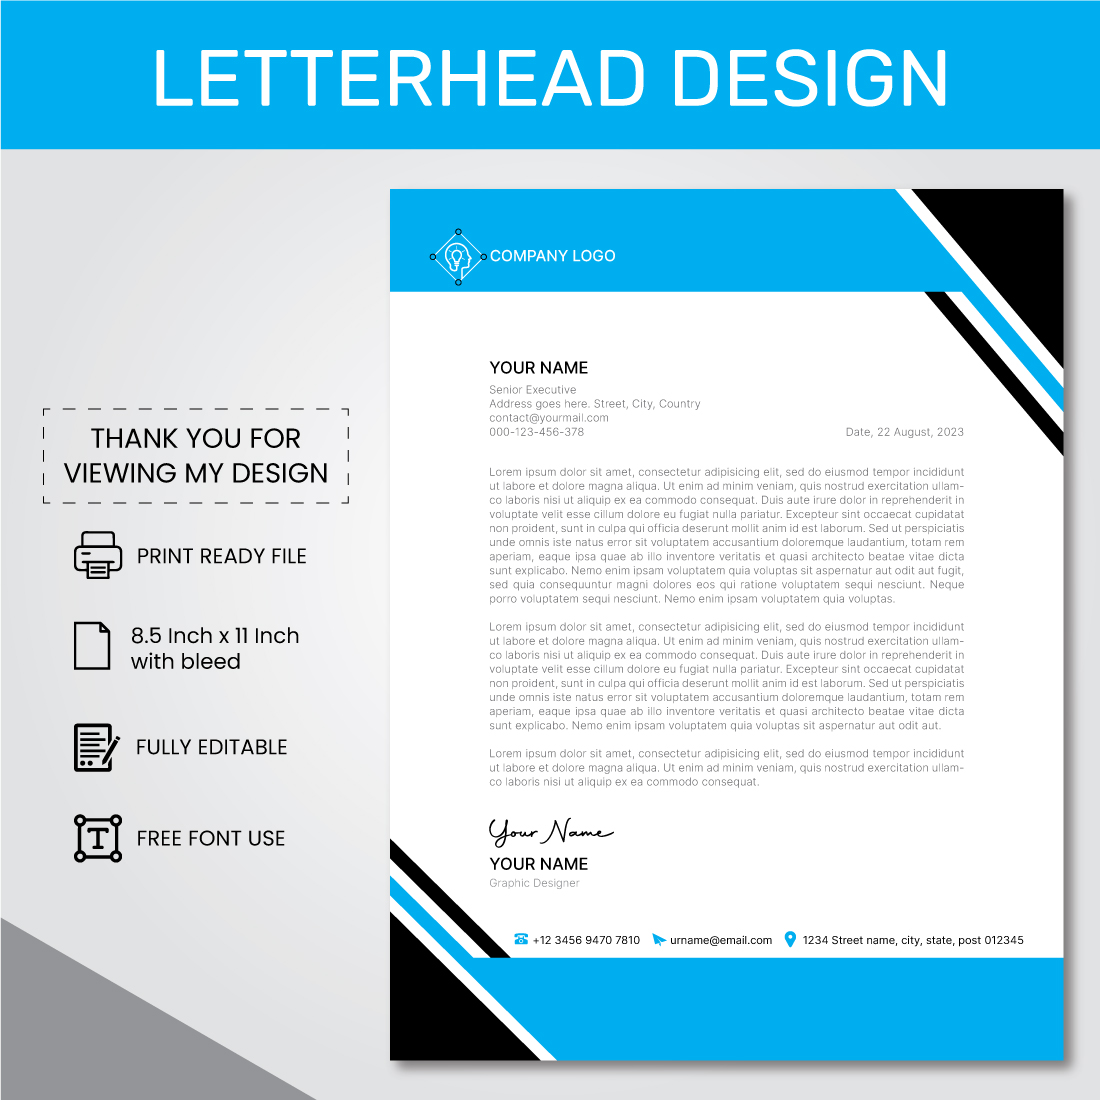 Free, printable business letterhead templates to customize